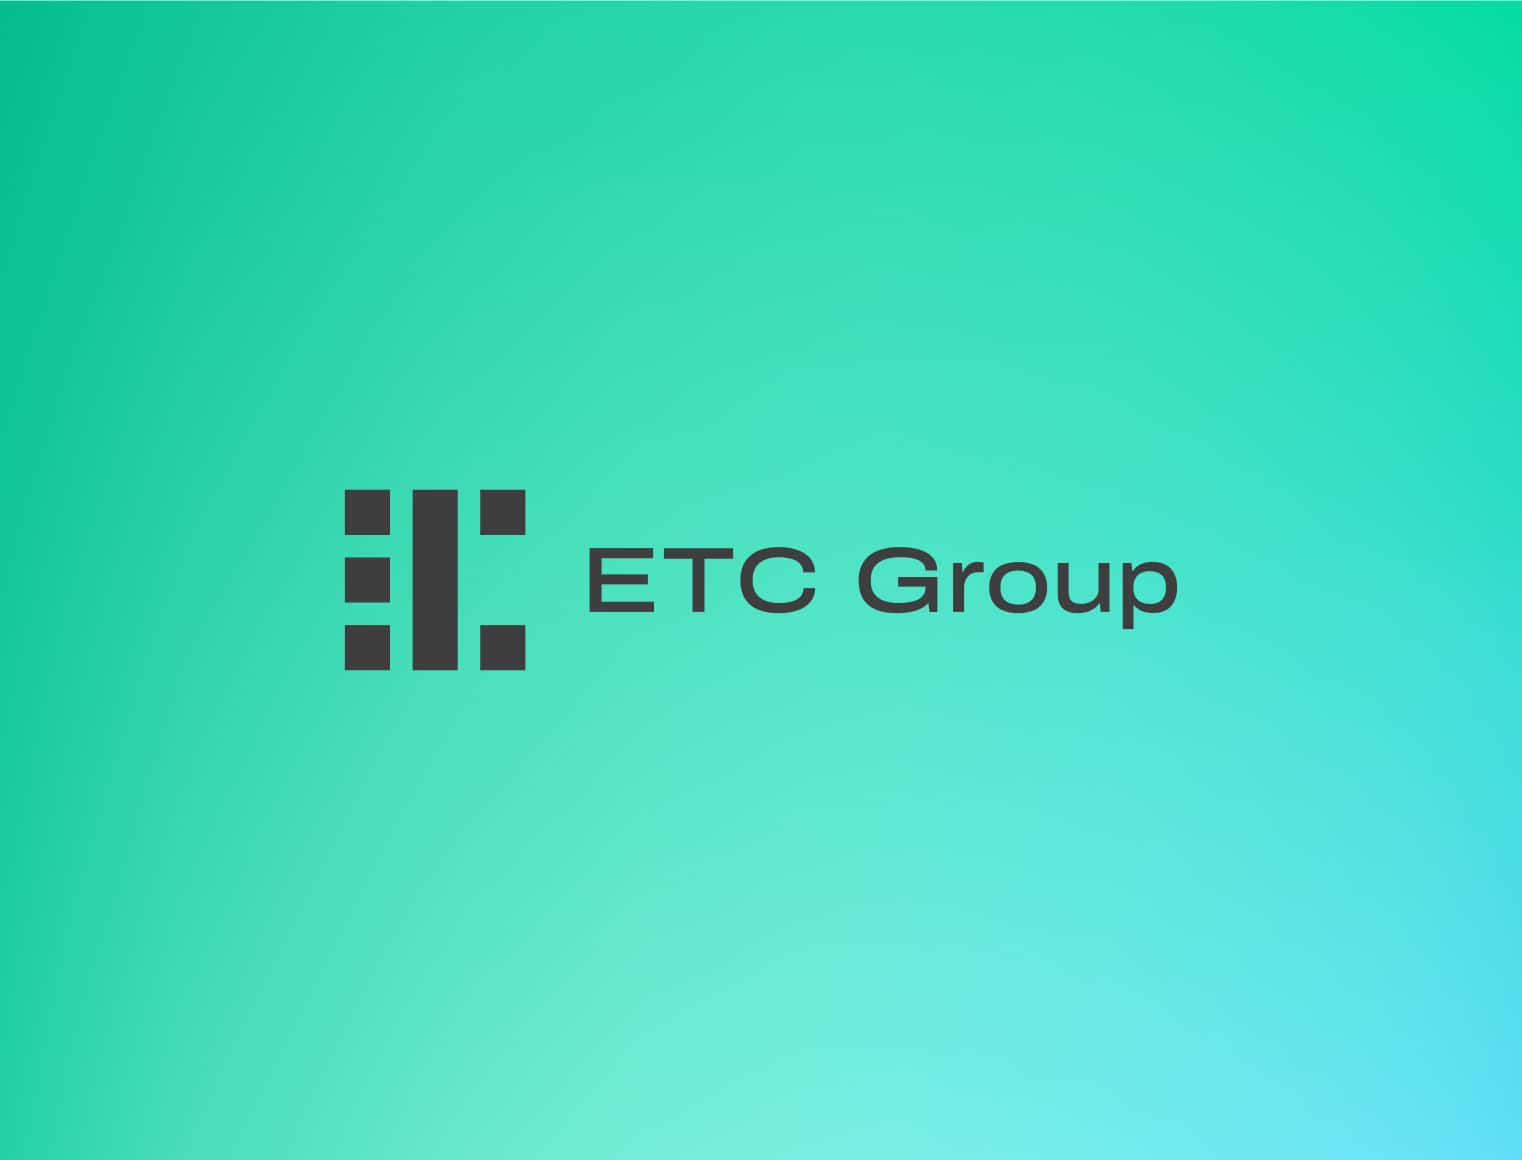 ETC Group’s Bitcoin ETP Reaches Record BTC Holdings as Total Group Assets Surpass $1bn